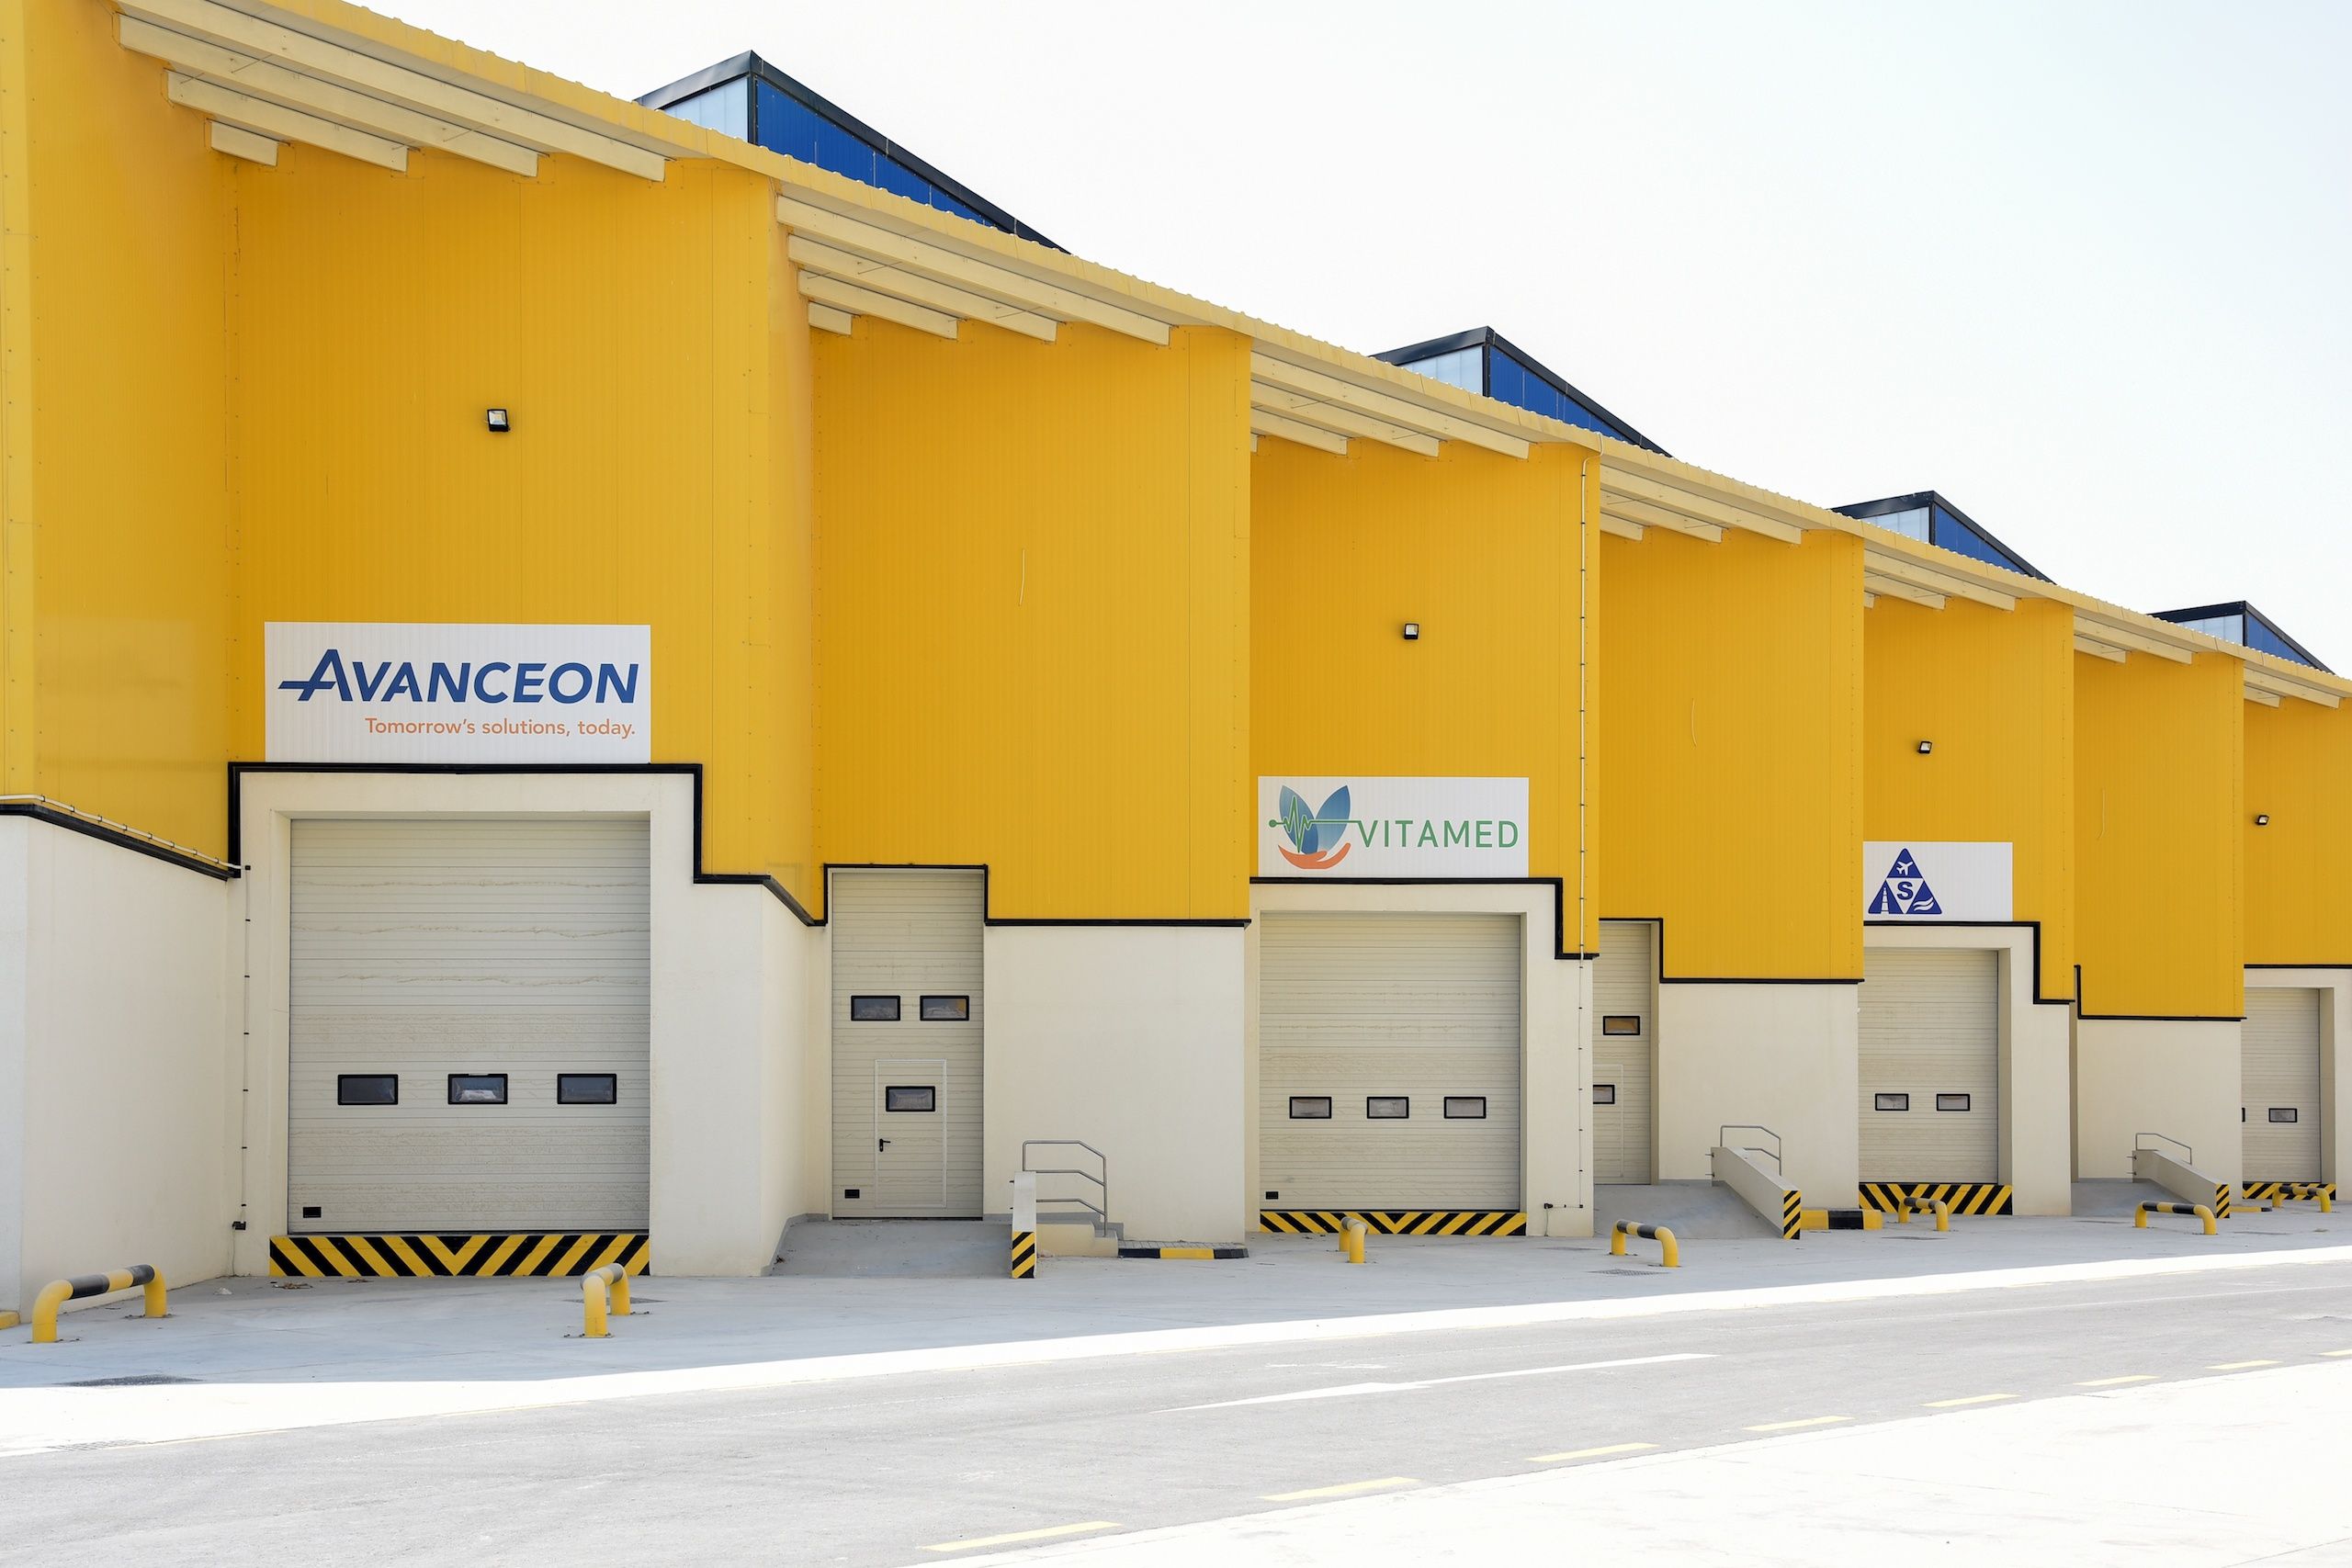 Bright yellow and blue warehousing buildings, with loading docks